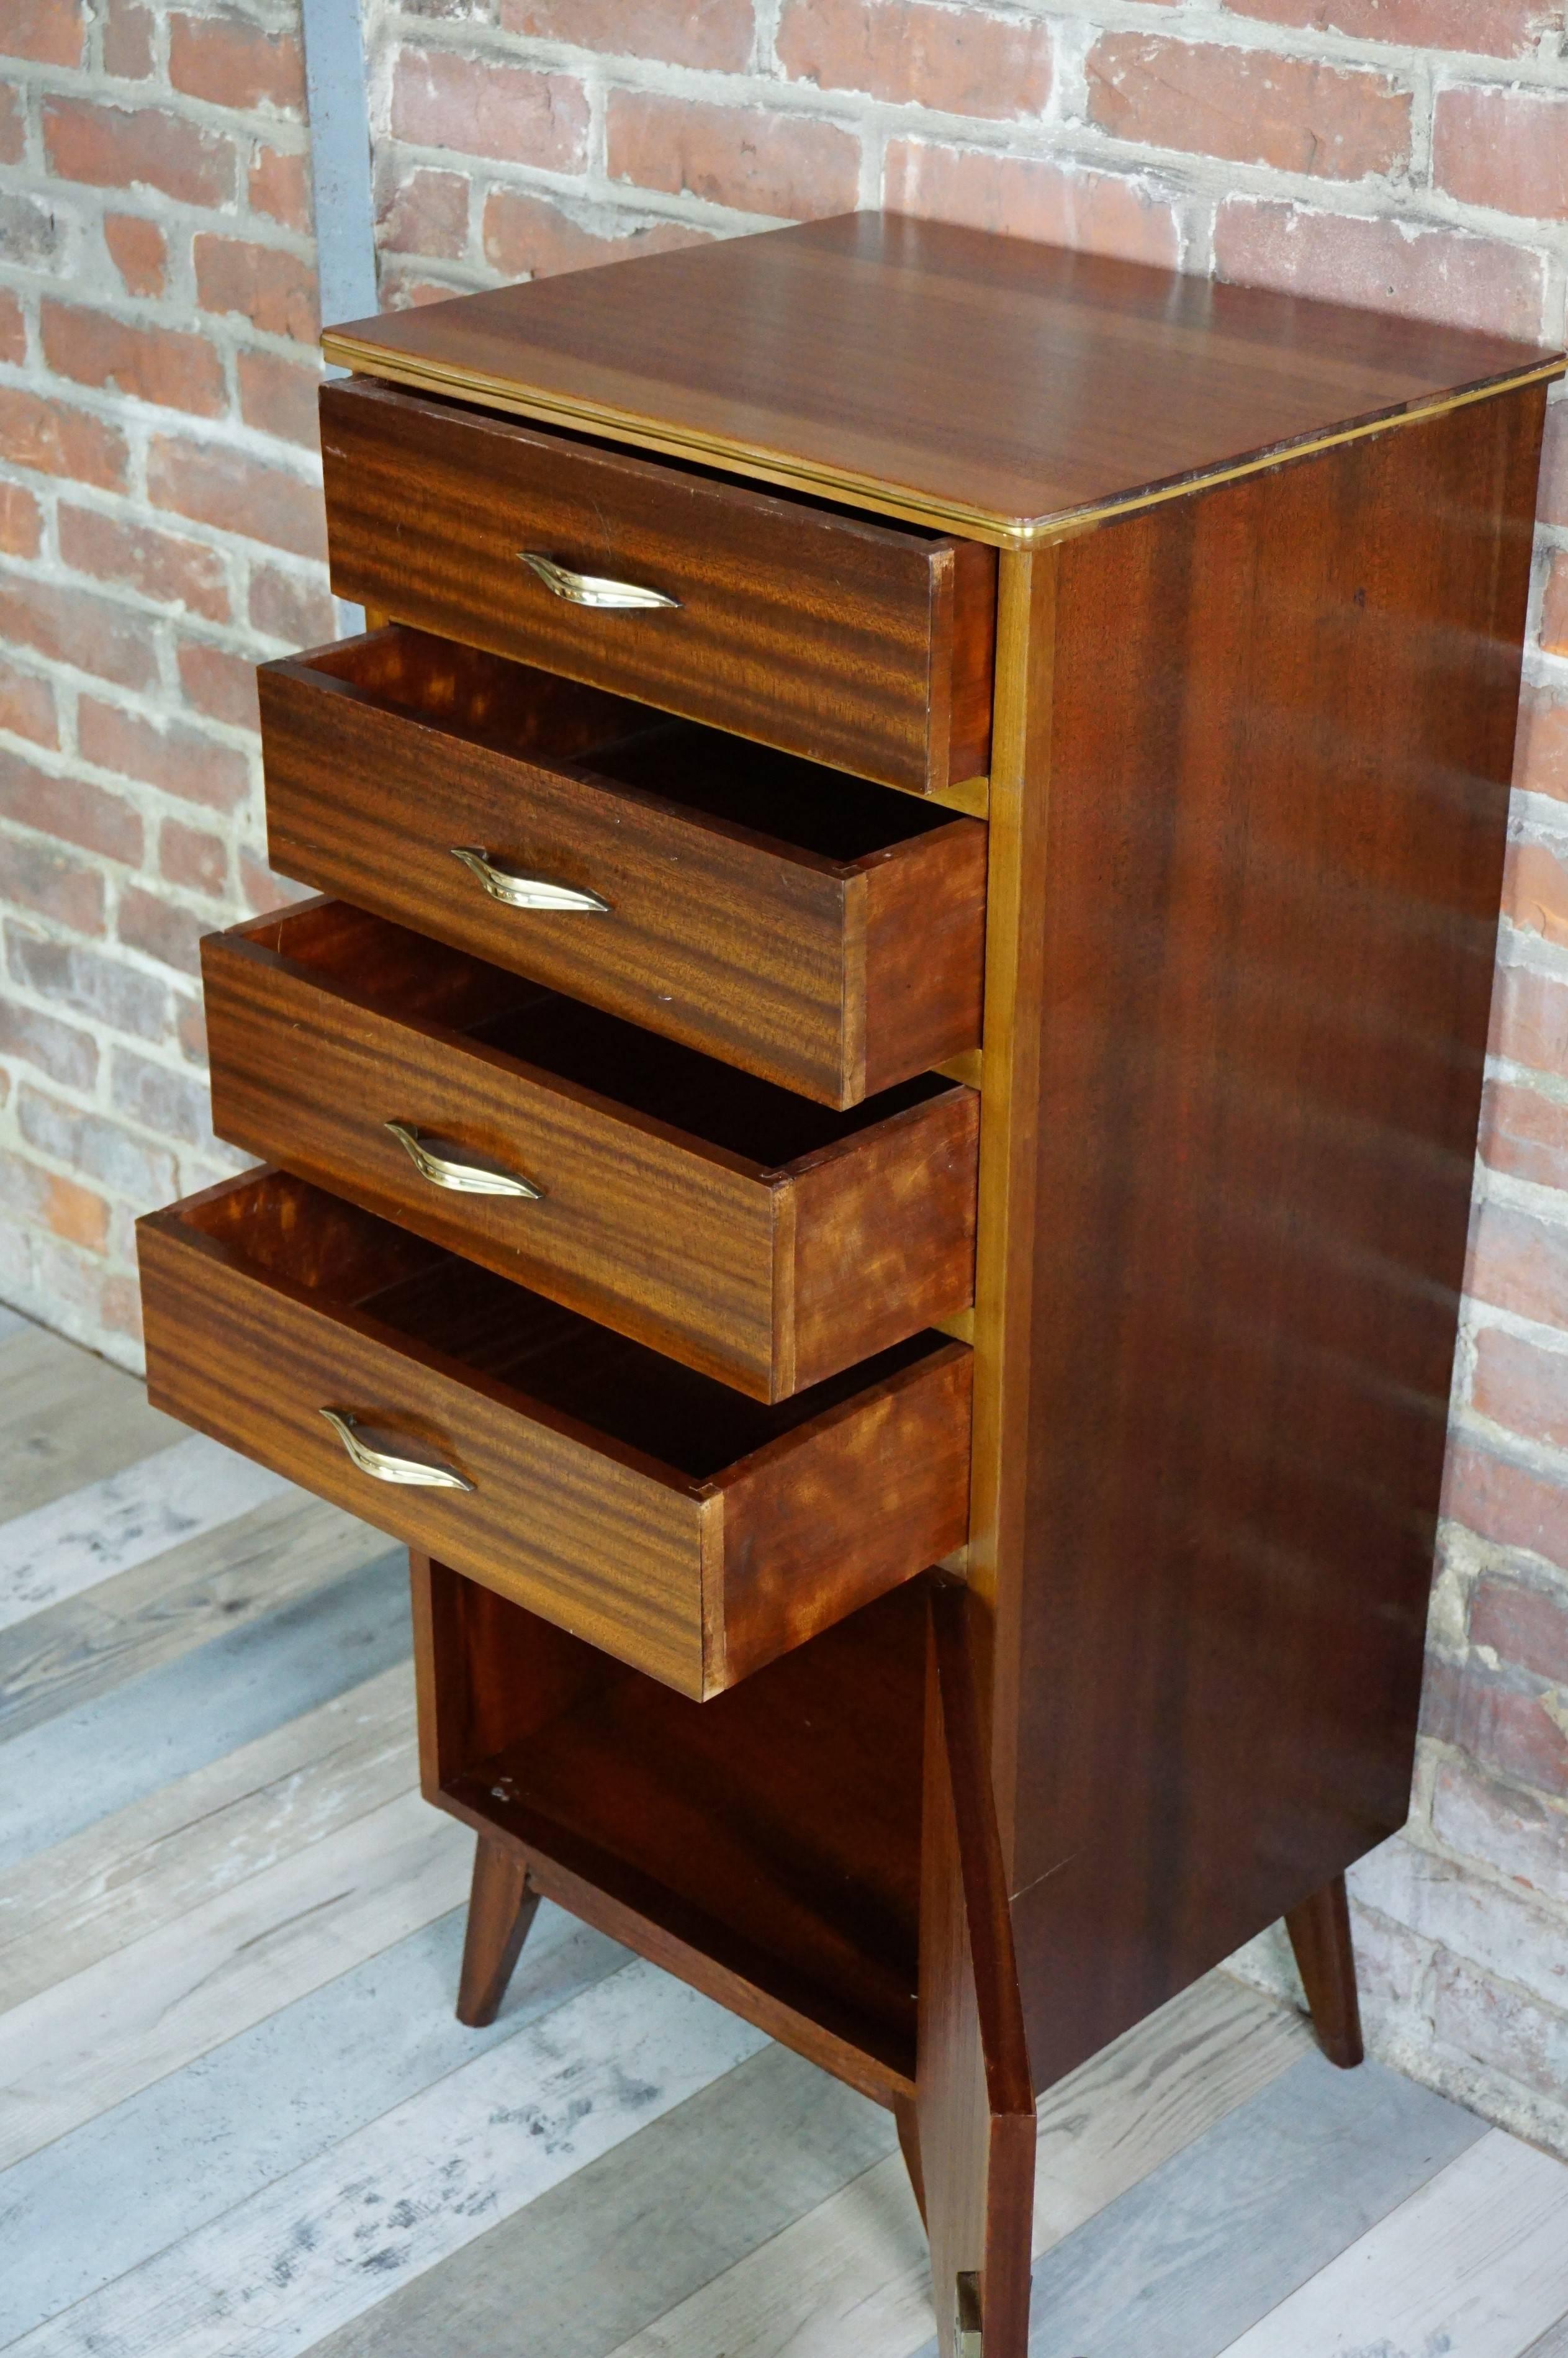 20th Century High Chest of Drawers Design from the 1950s